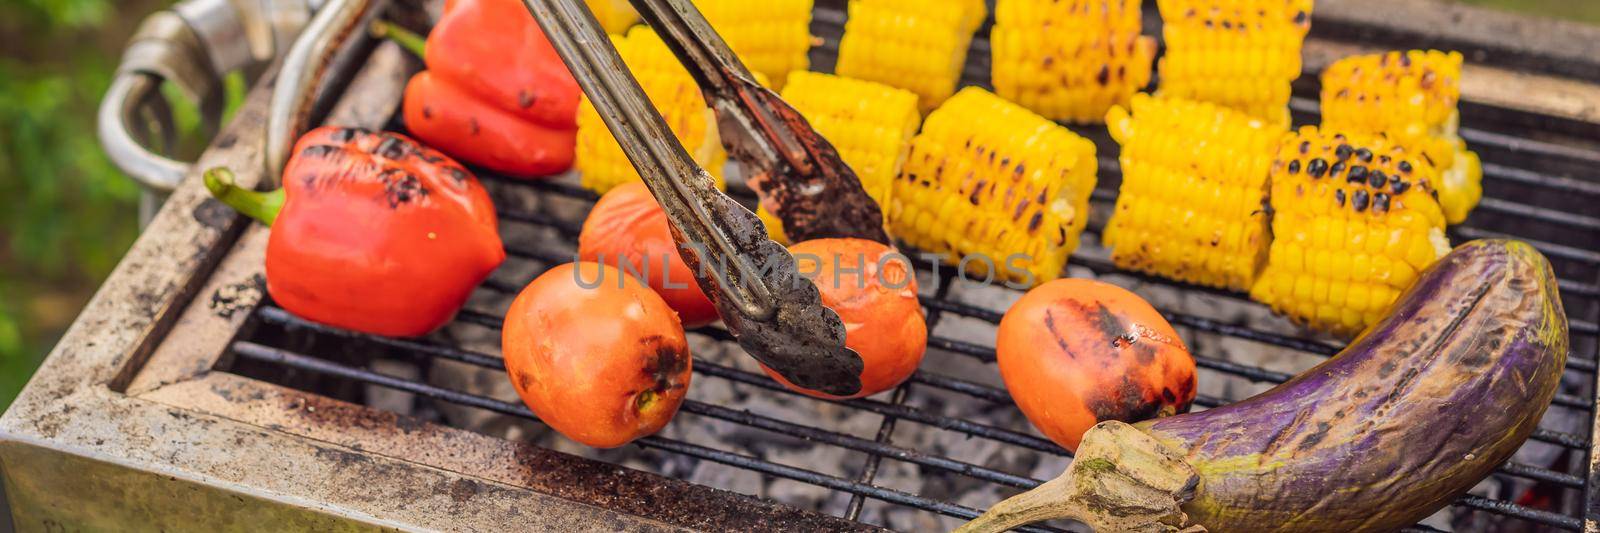 Man with tongs cooking on a back yard barbecue. BANNER, LONG FORMAT